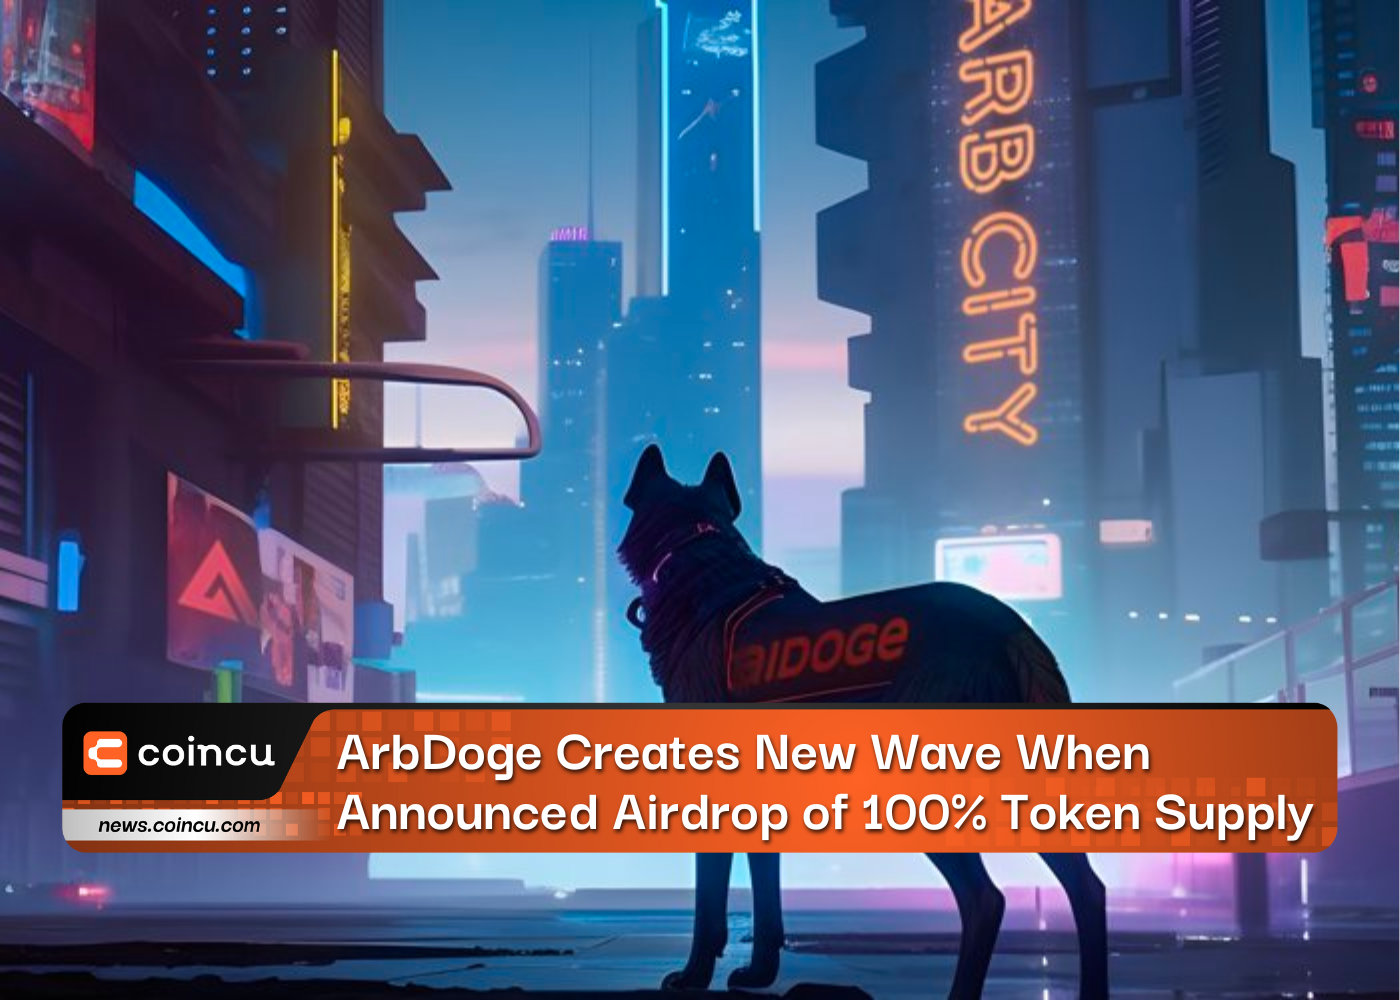 ArbDoge Creates New Wave When Announced Airdrop of 100% Token Supply